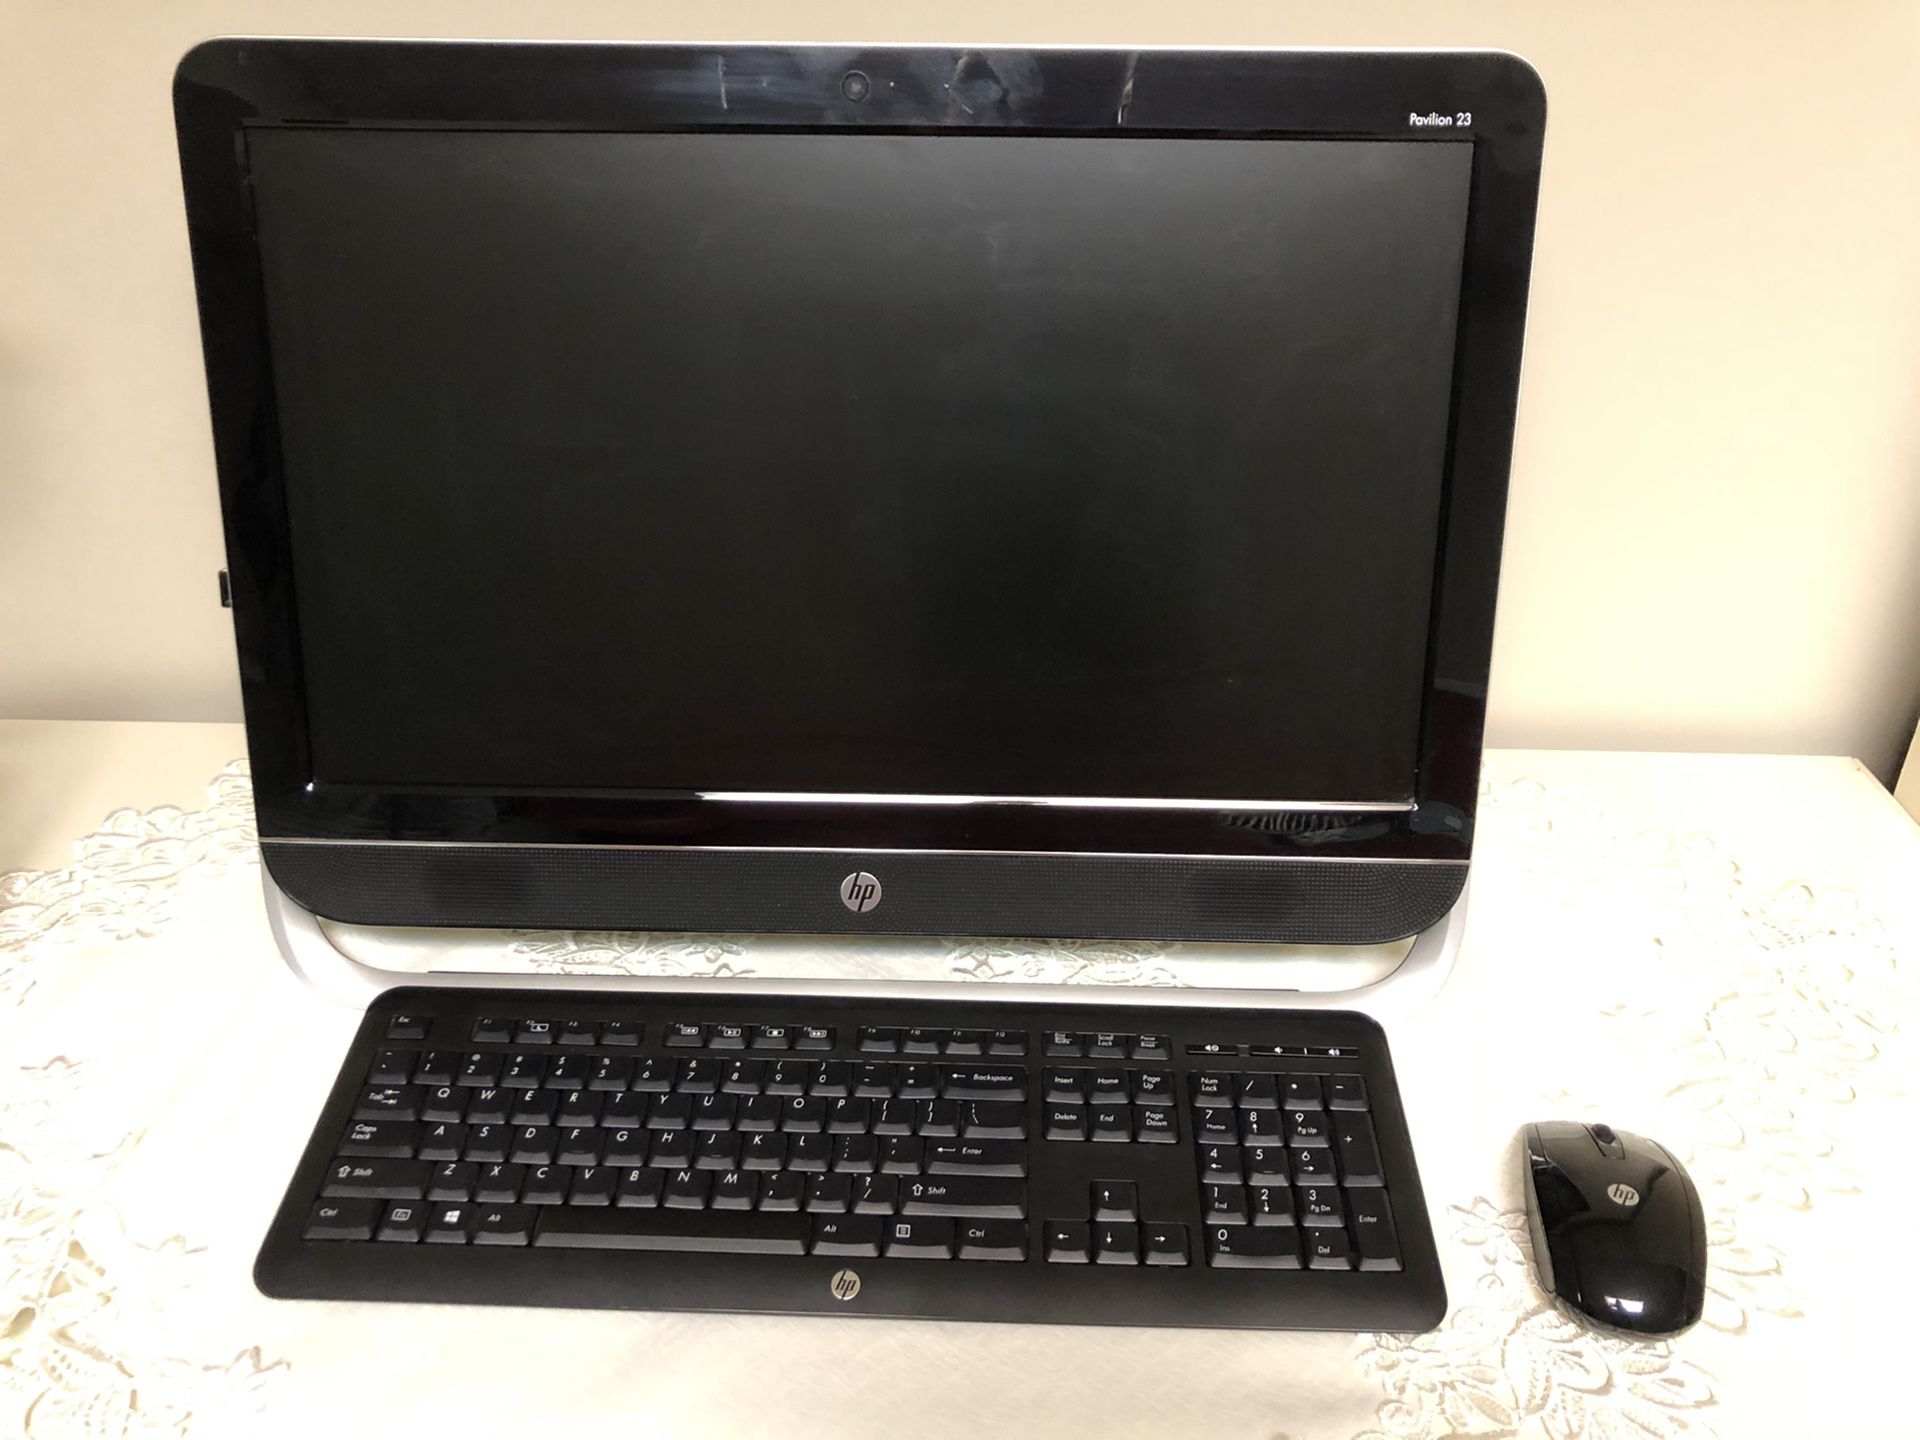 HP Pavilion 23 All-In-One PC